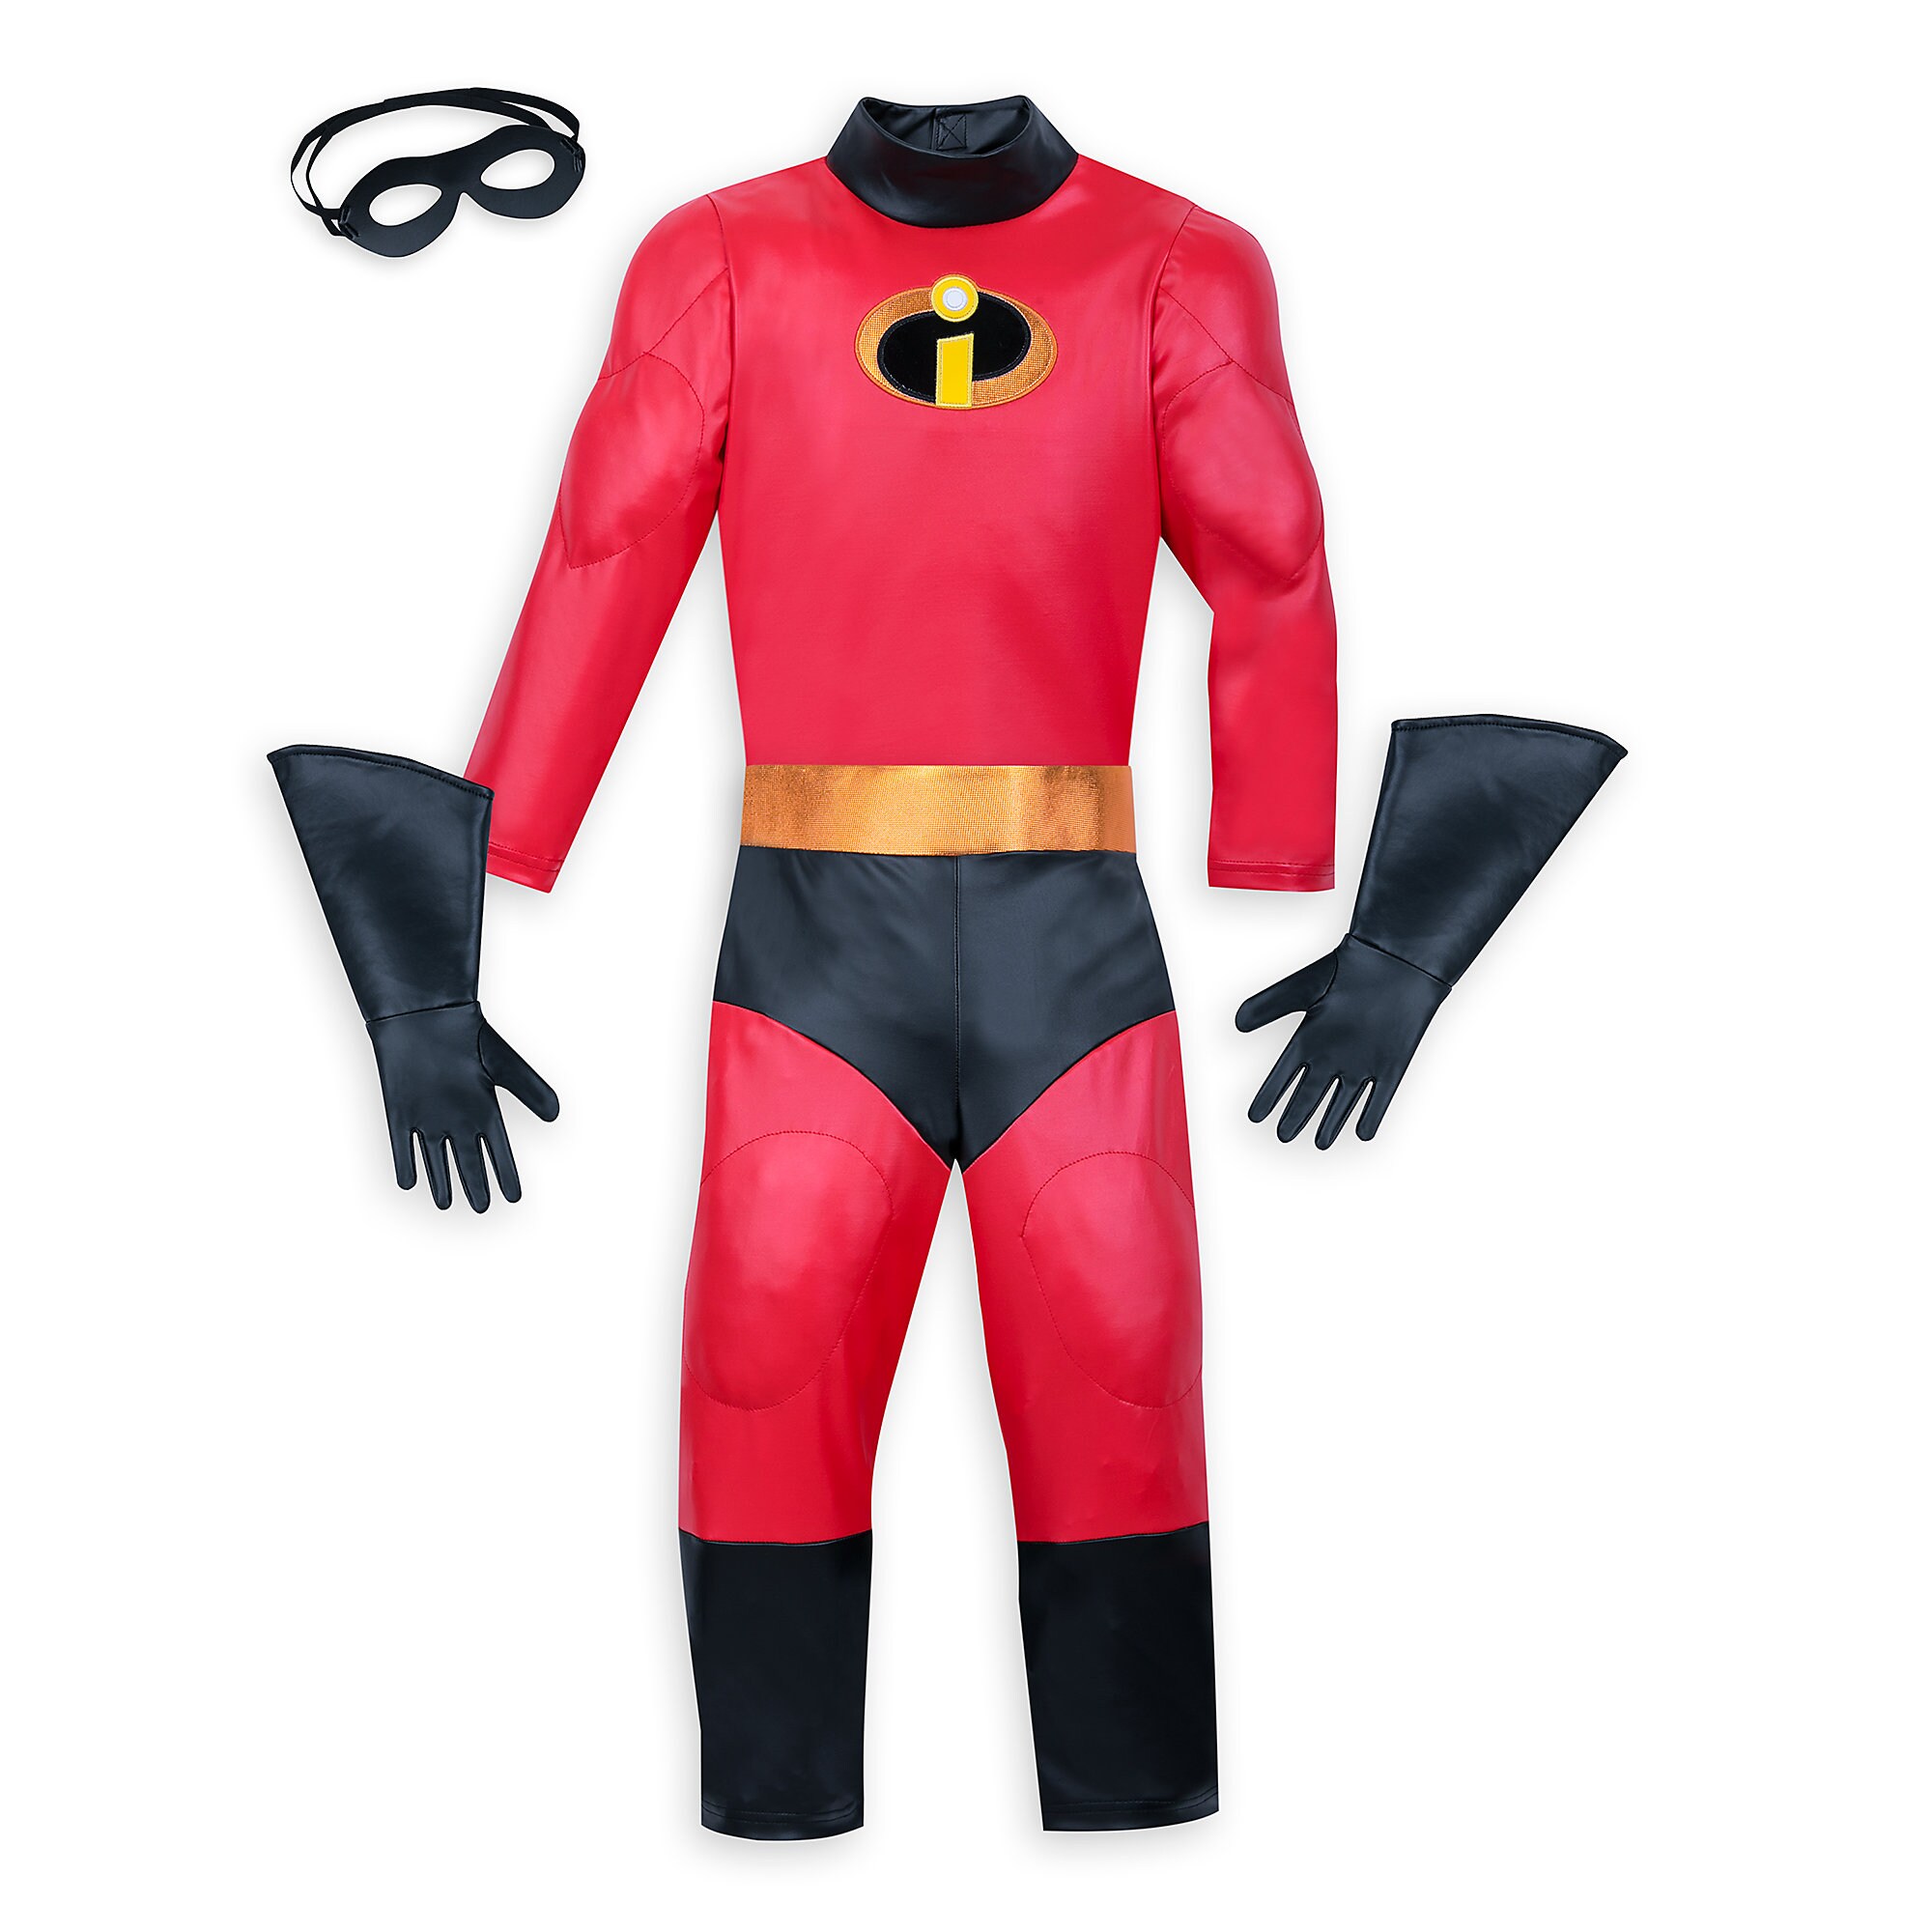 Dash Costume for Kids - Incredibles 2